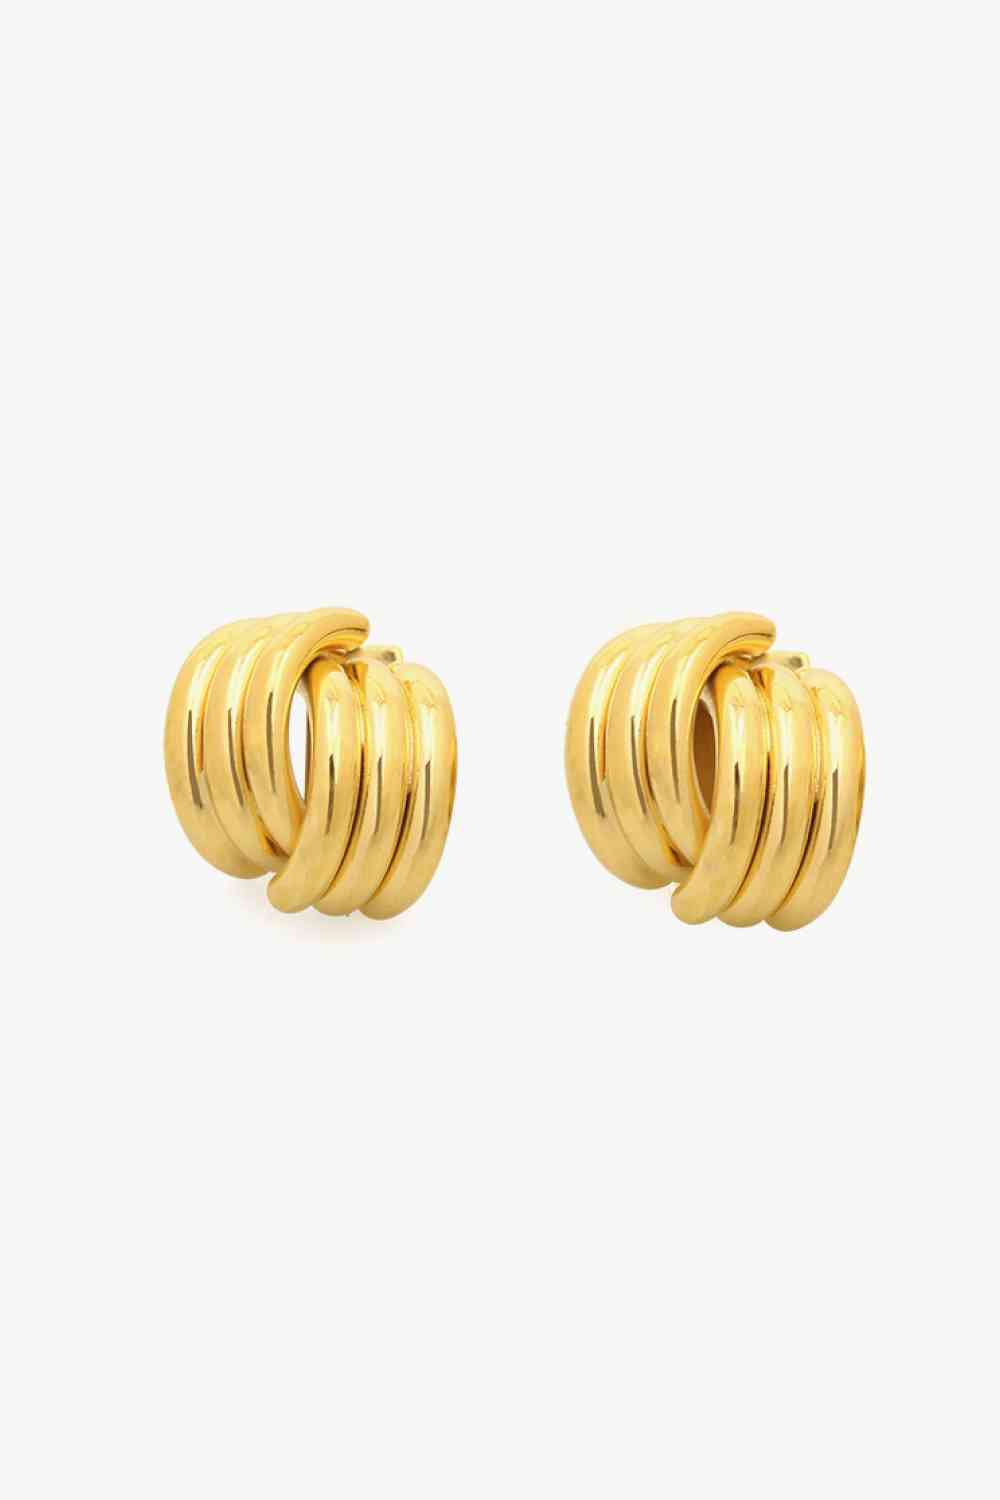 Explore More Collection - Line Design Stud Earrings